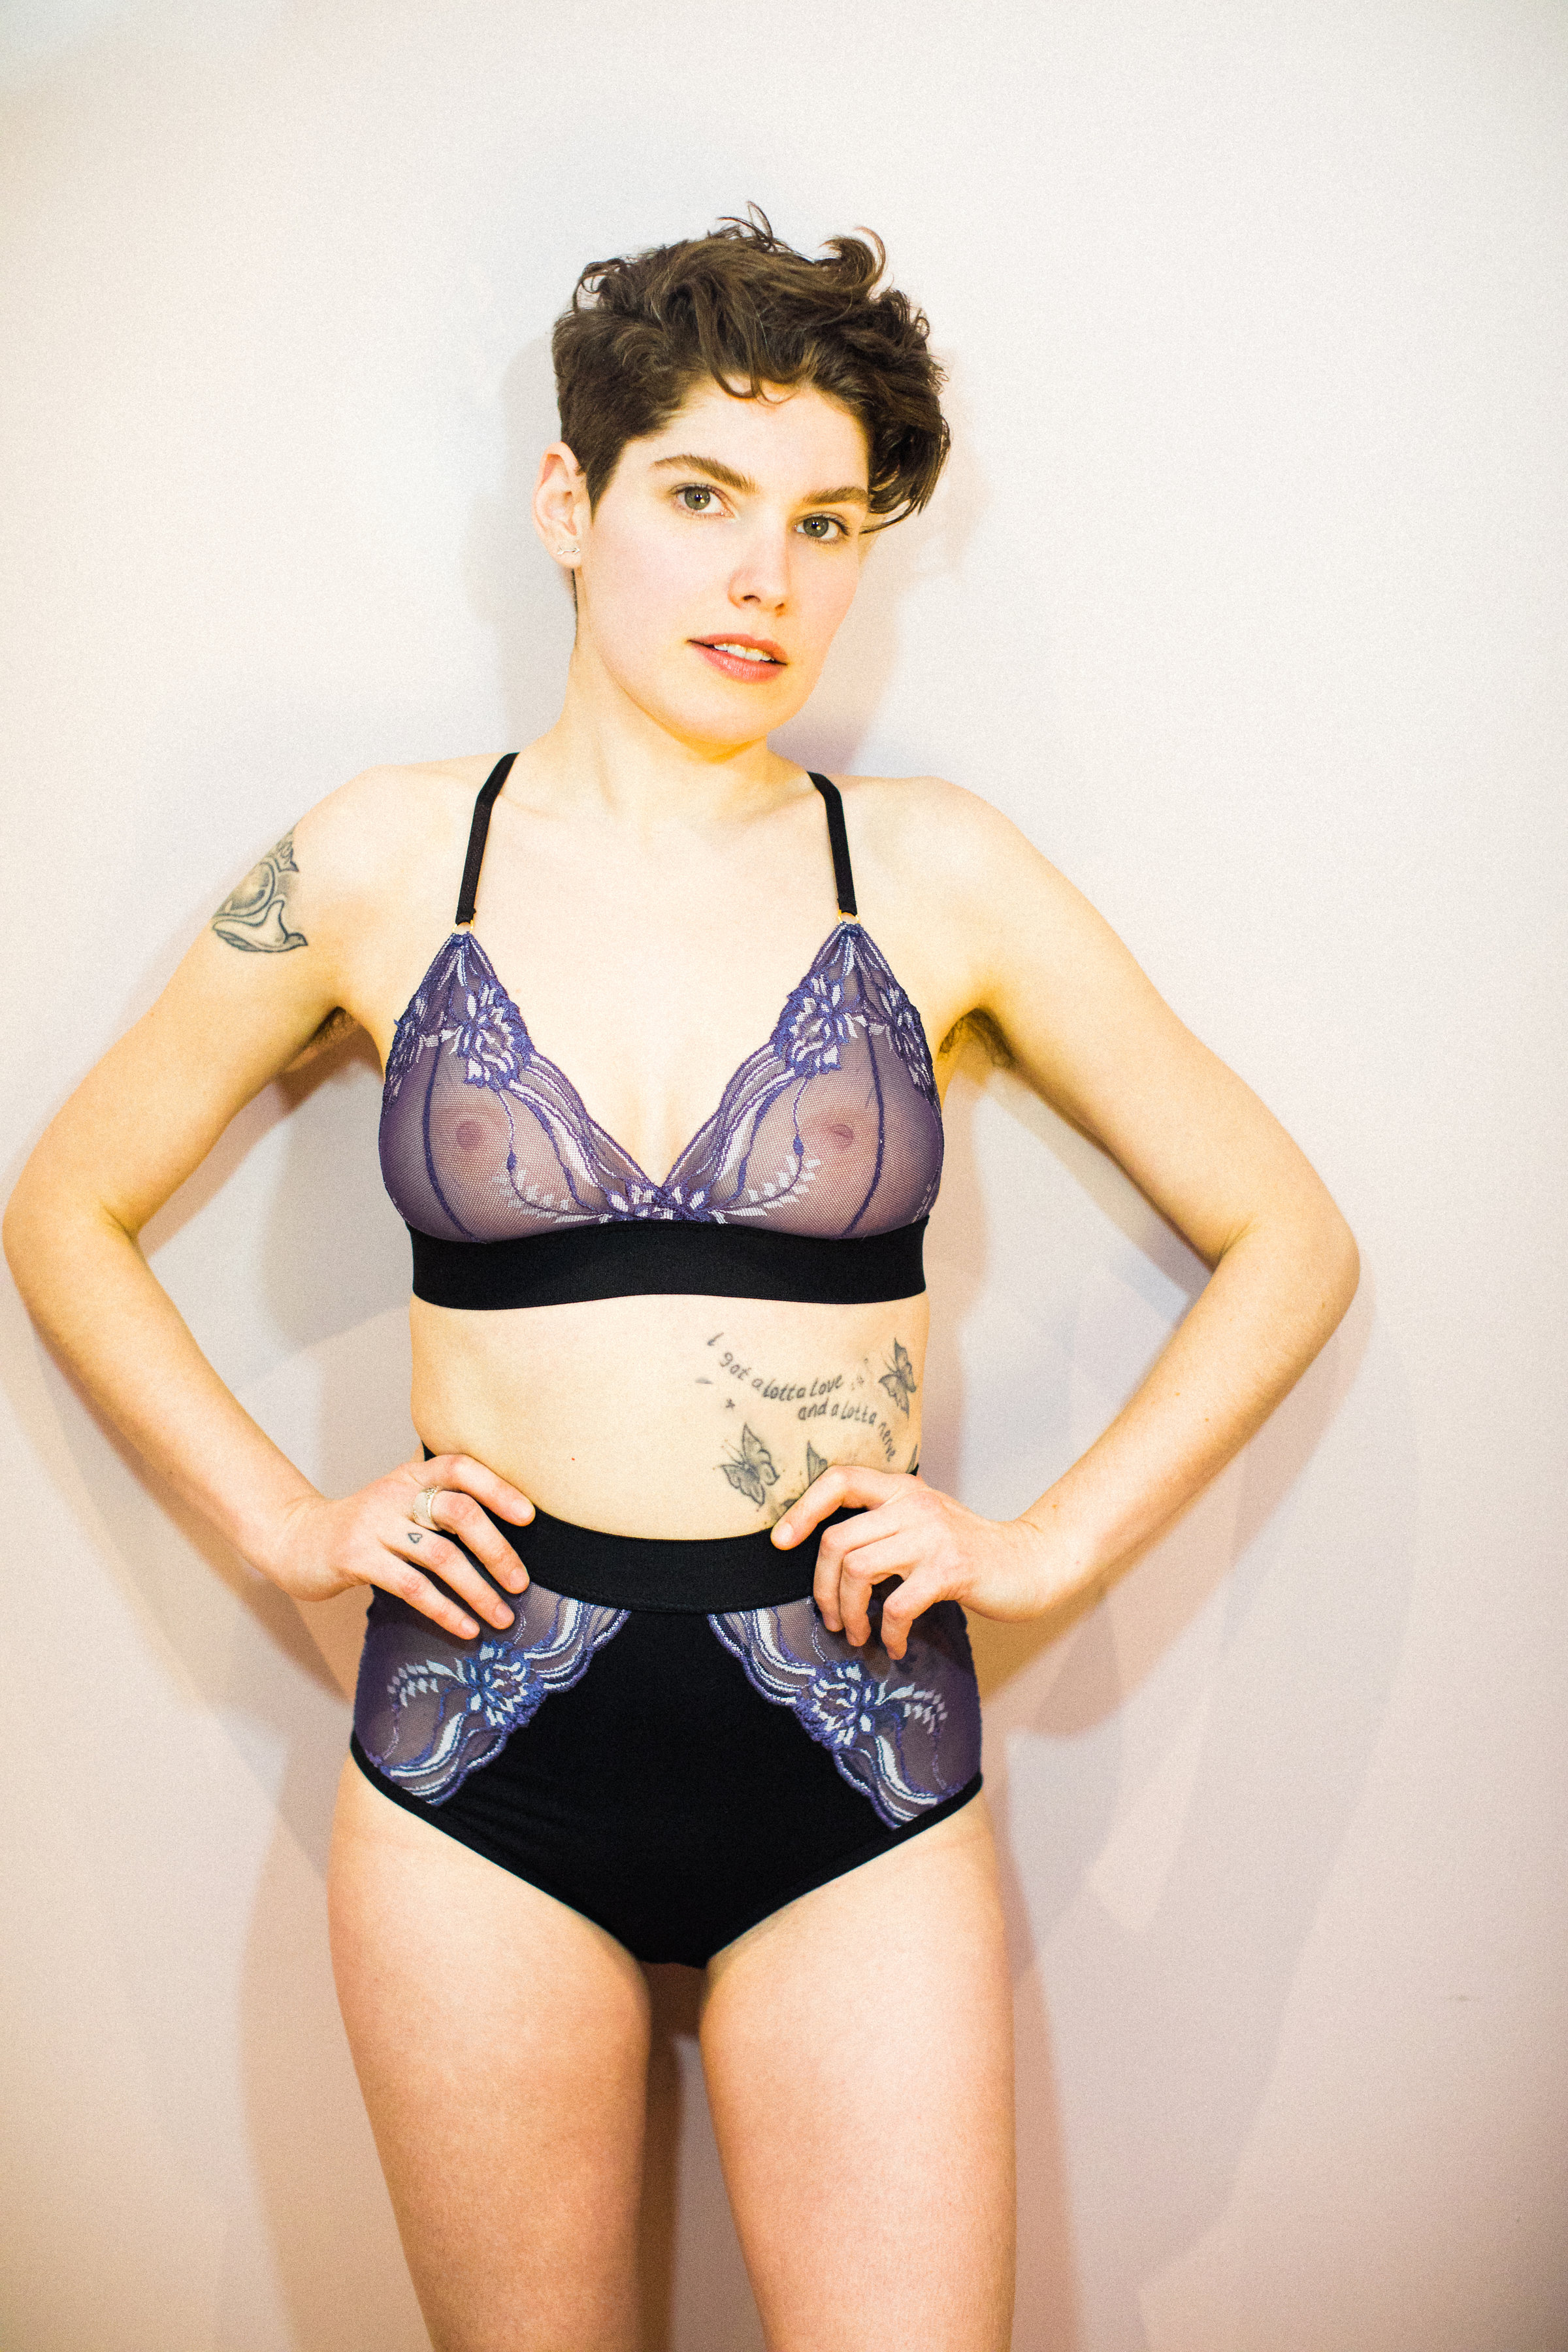 The Bra Fitter Diaries Archives - Broad Lingerie